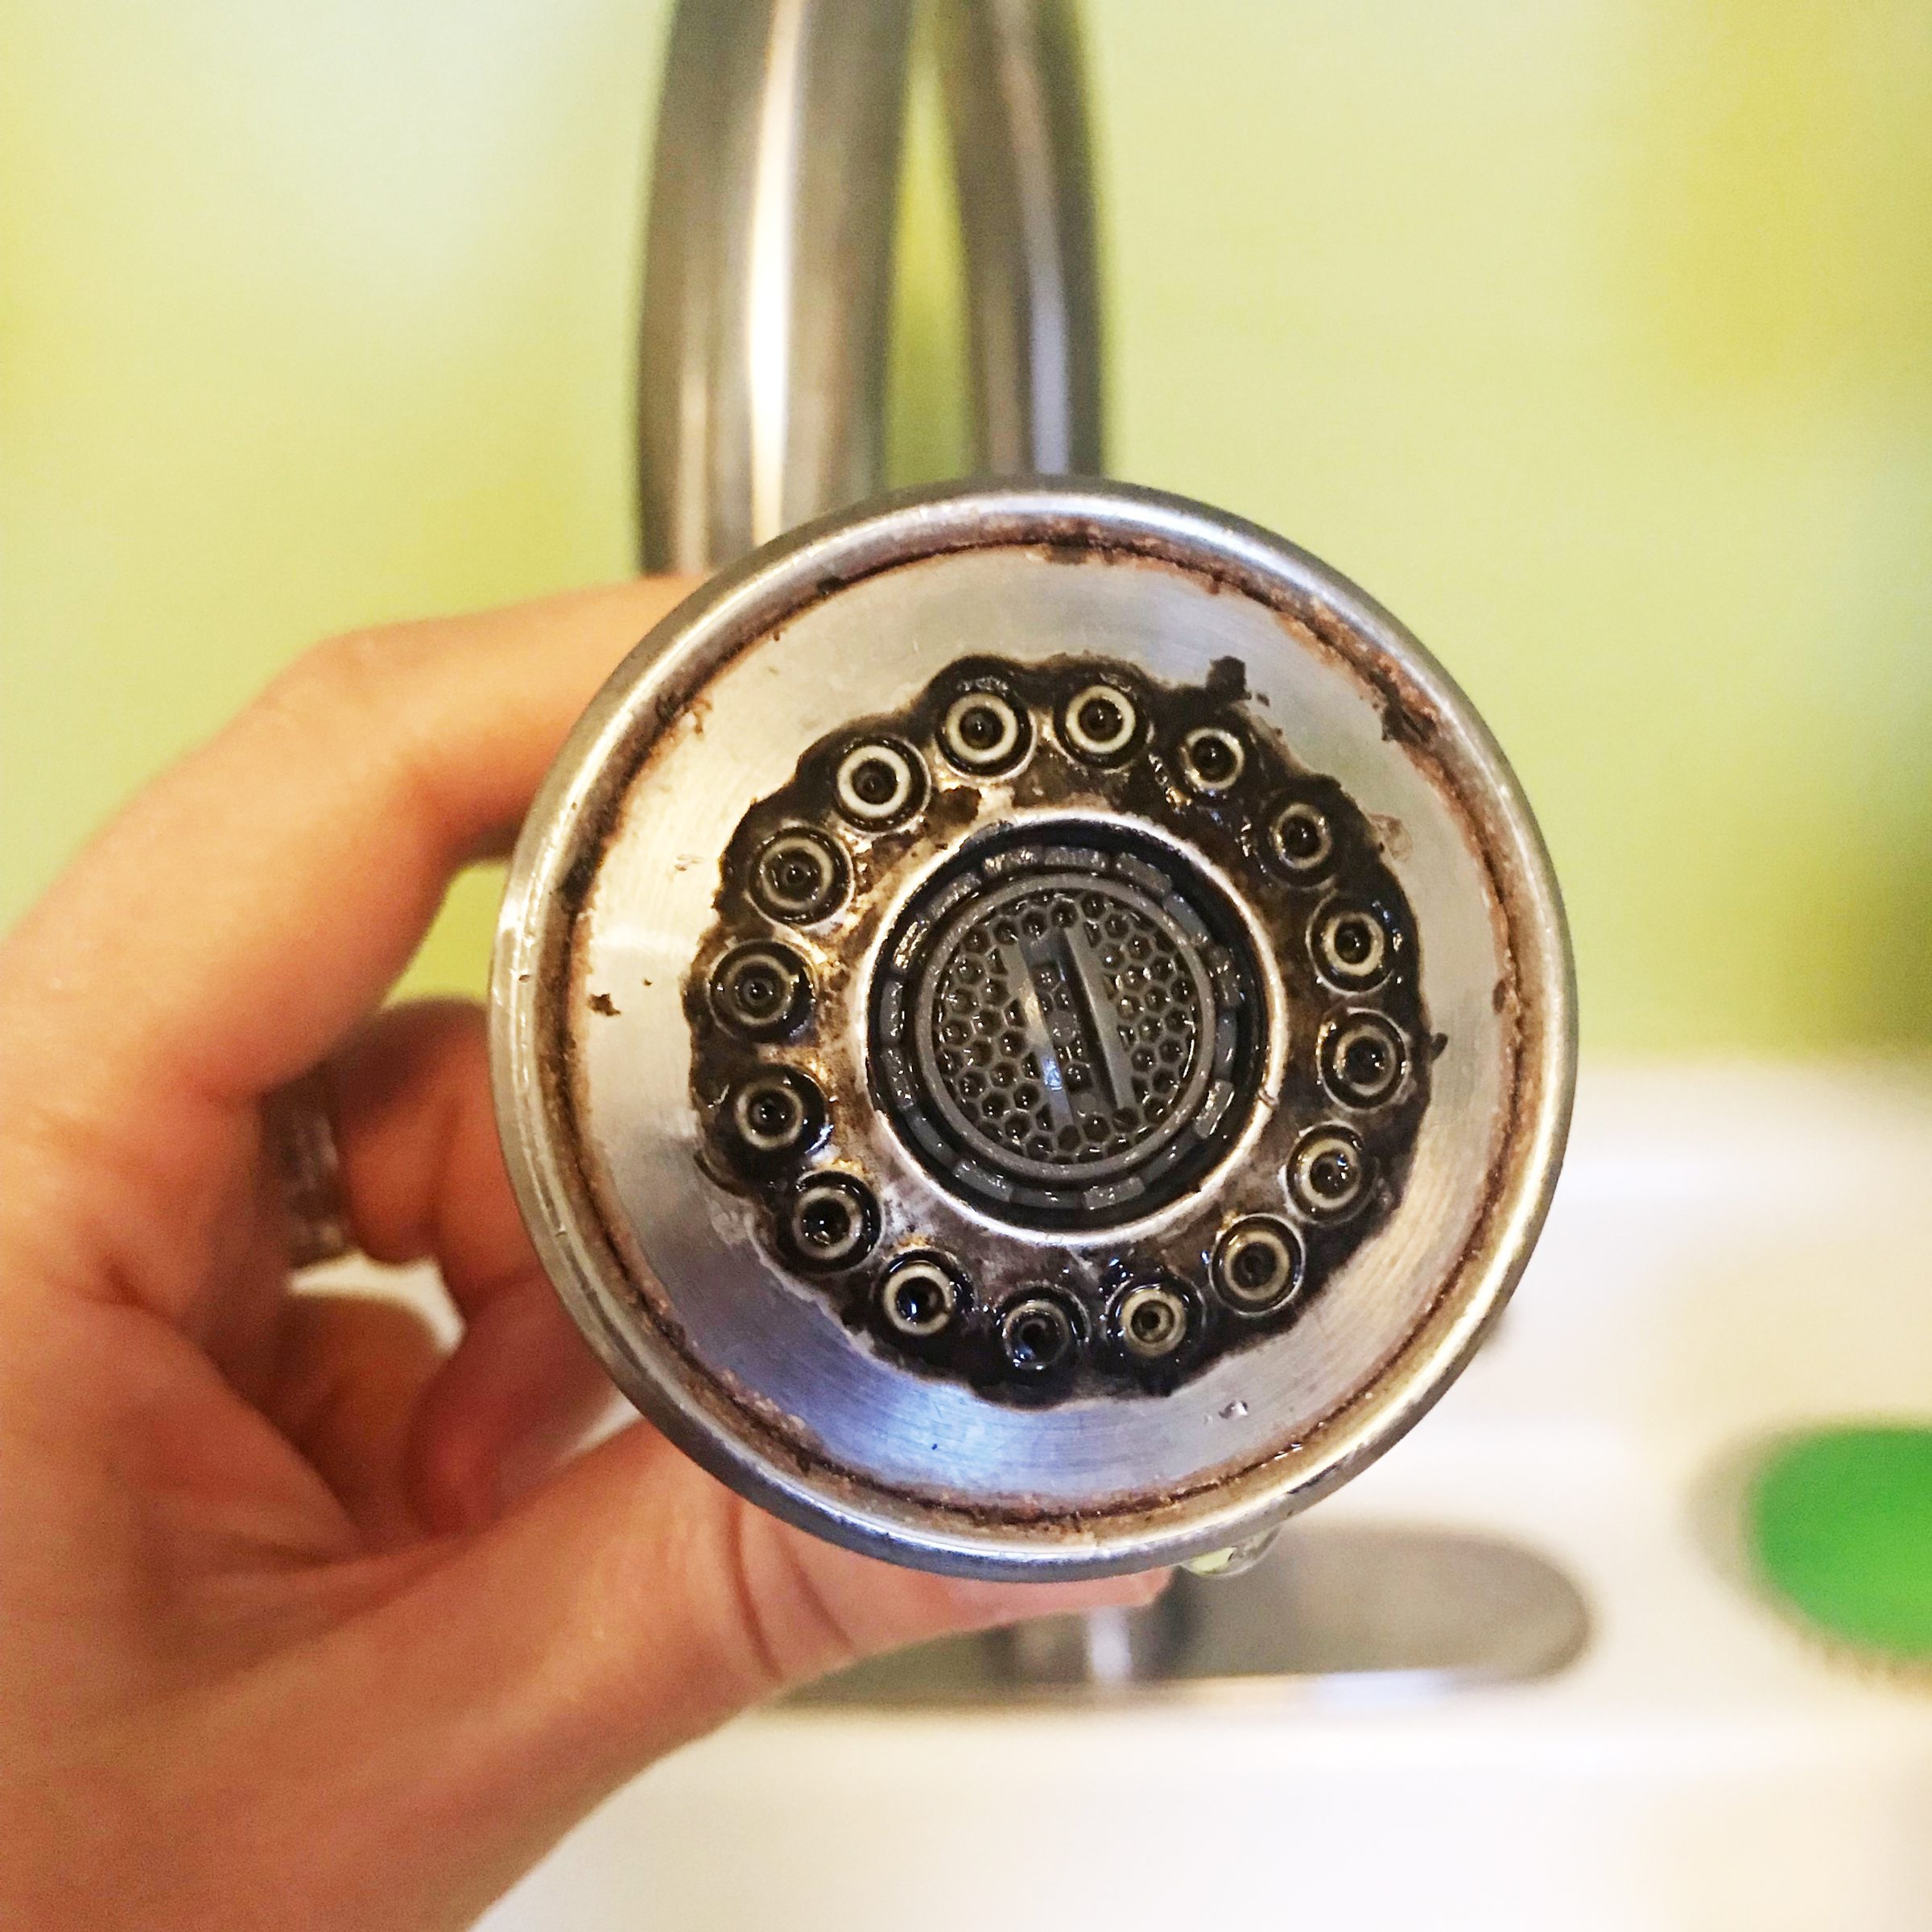 How to Clean Every Type of Faucet